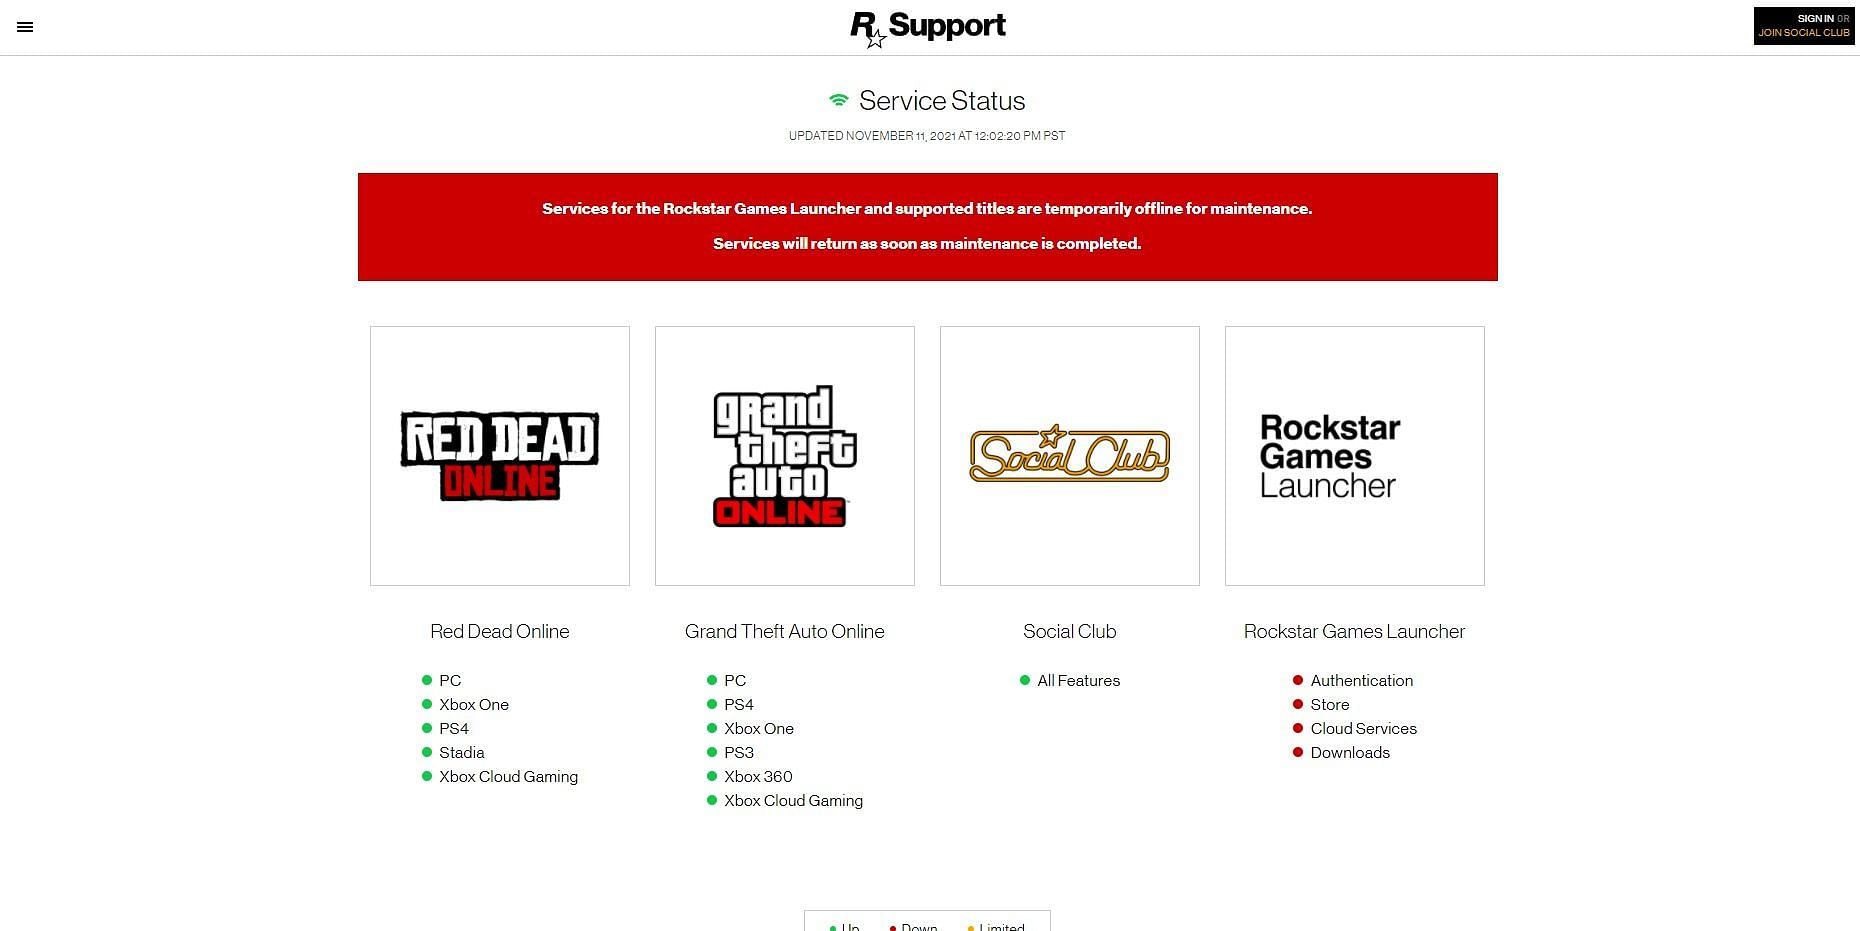 Another image of the service being down (Image via Rockstar Games)